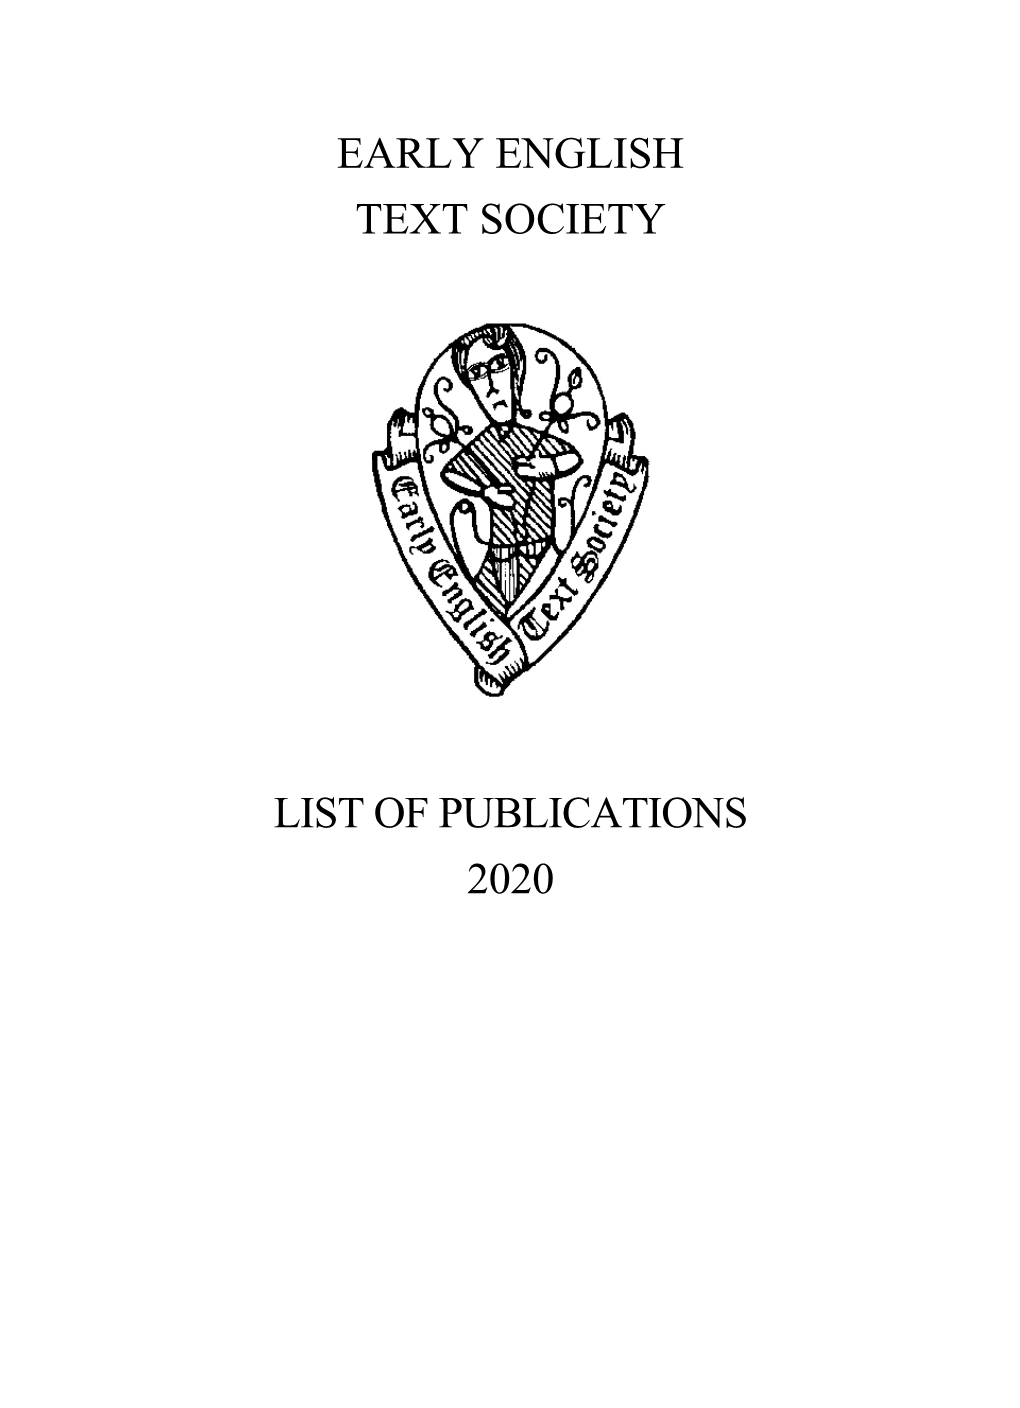 Early English Text Society List of Publications 2020